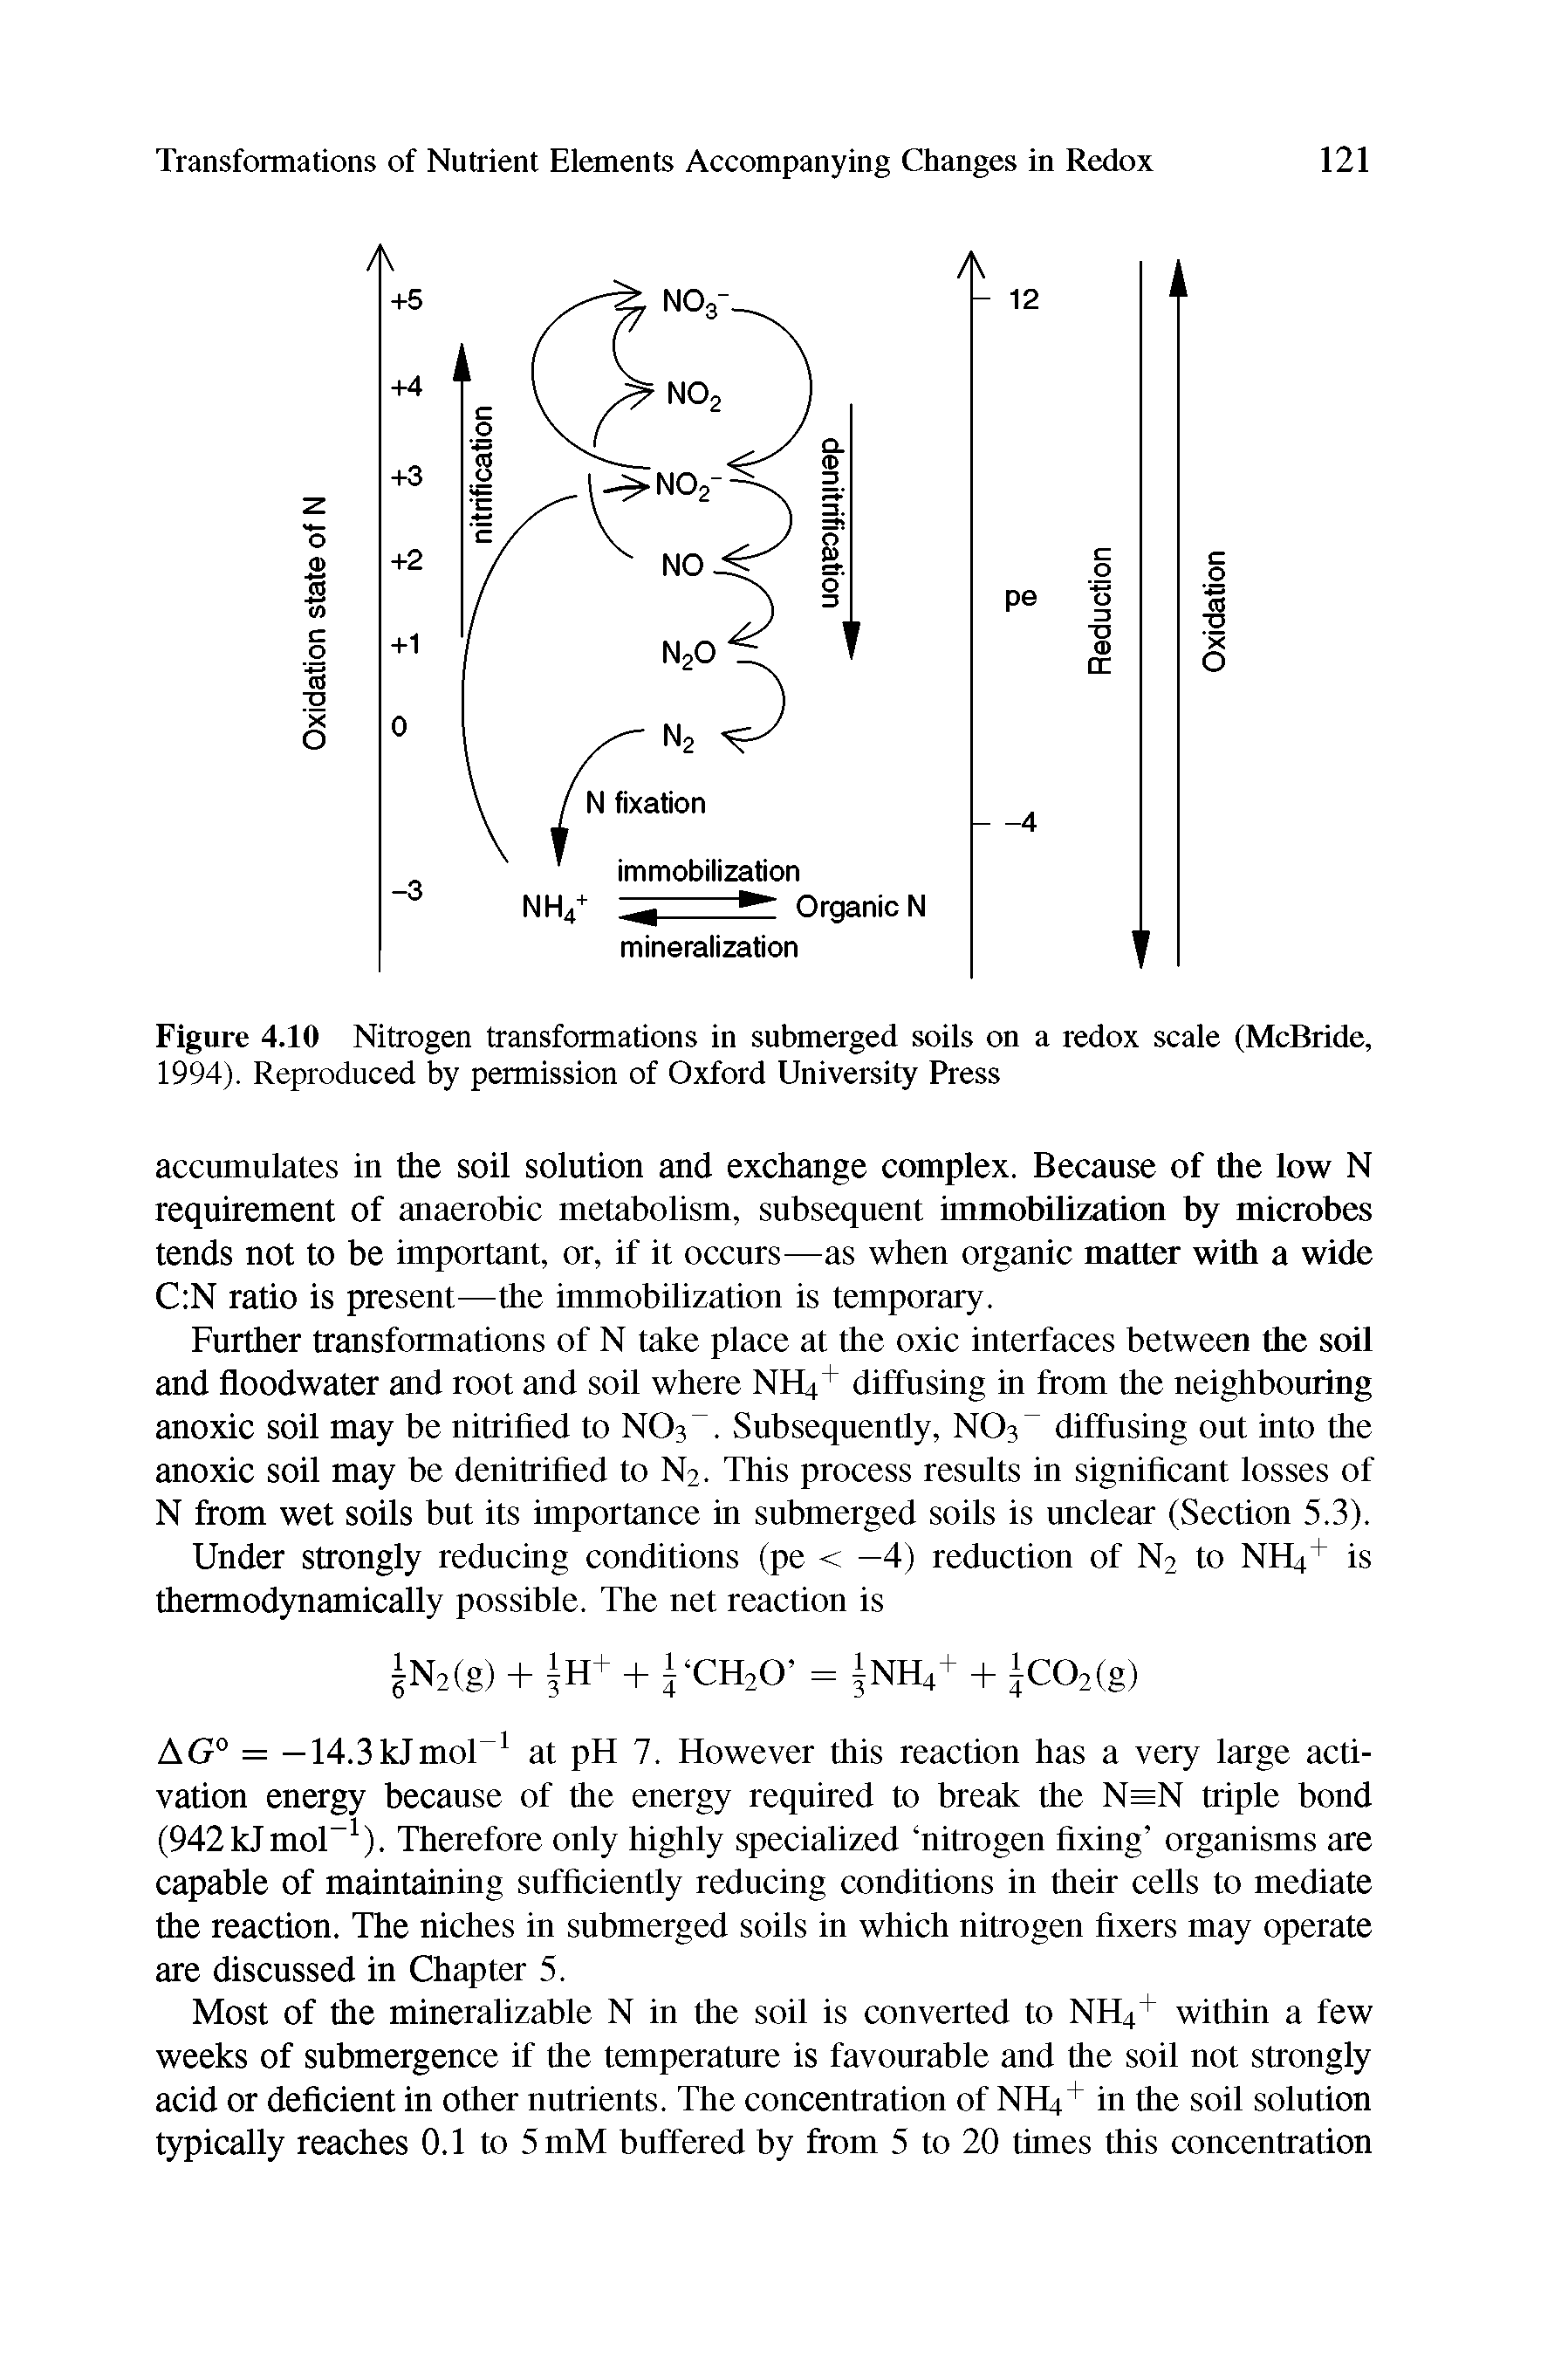 Figure 4.10 Nitrogen transformations in submerged soils on a redox scale (McBride, 1994). Reproduced by permission of Oxford University Press...